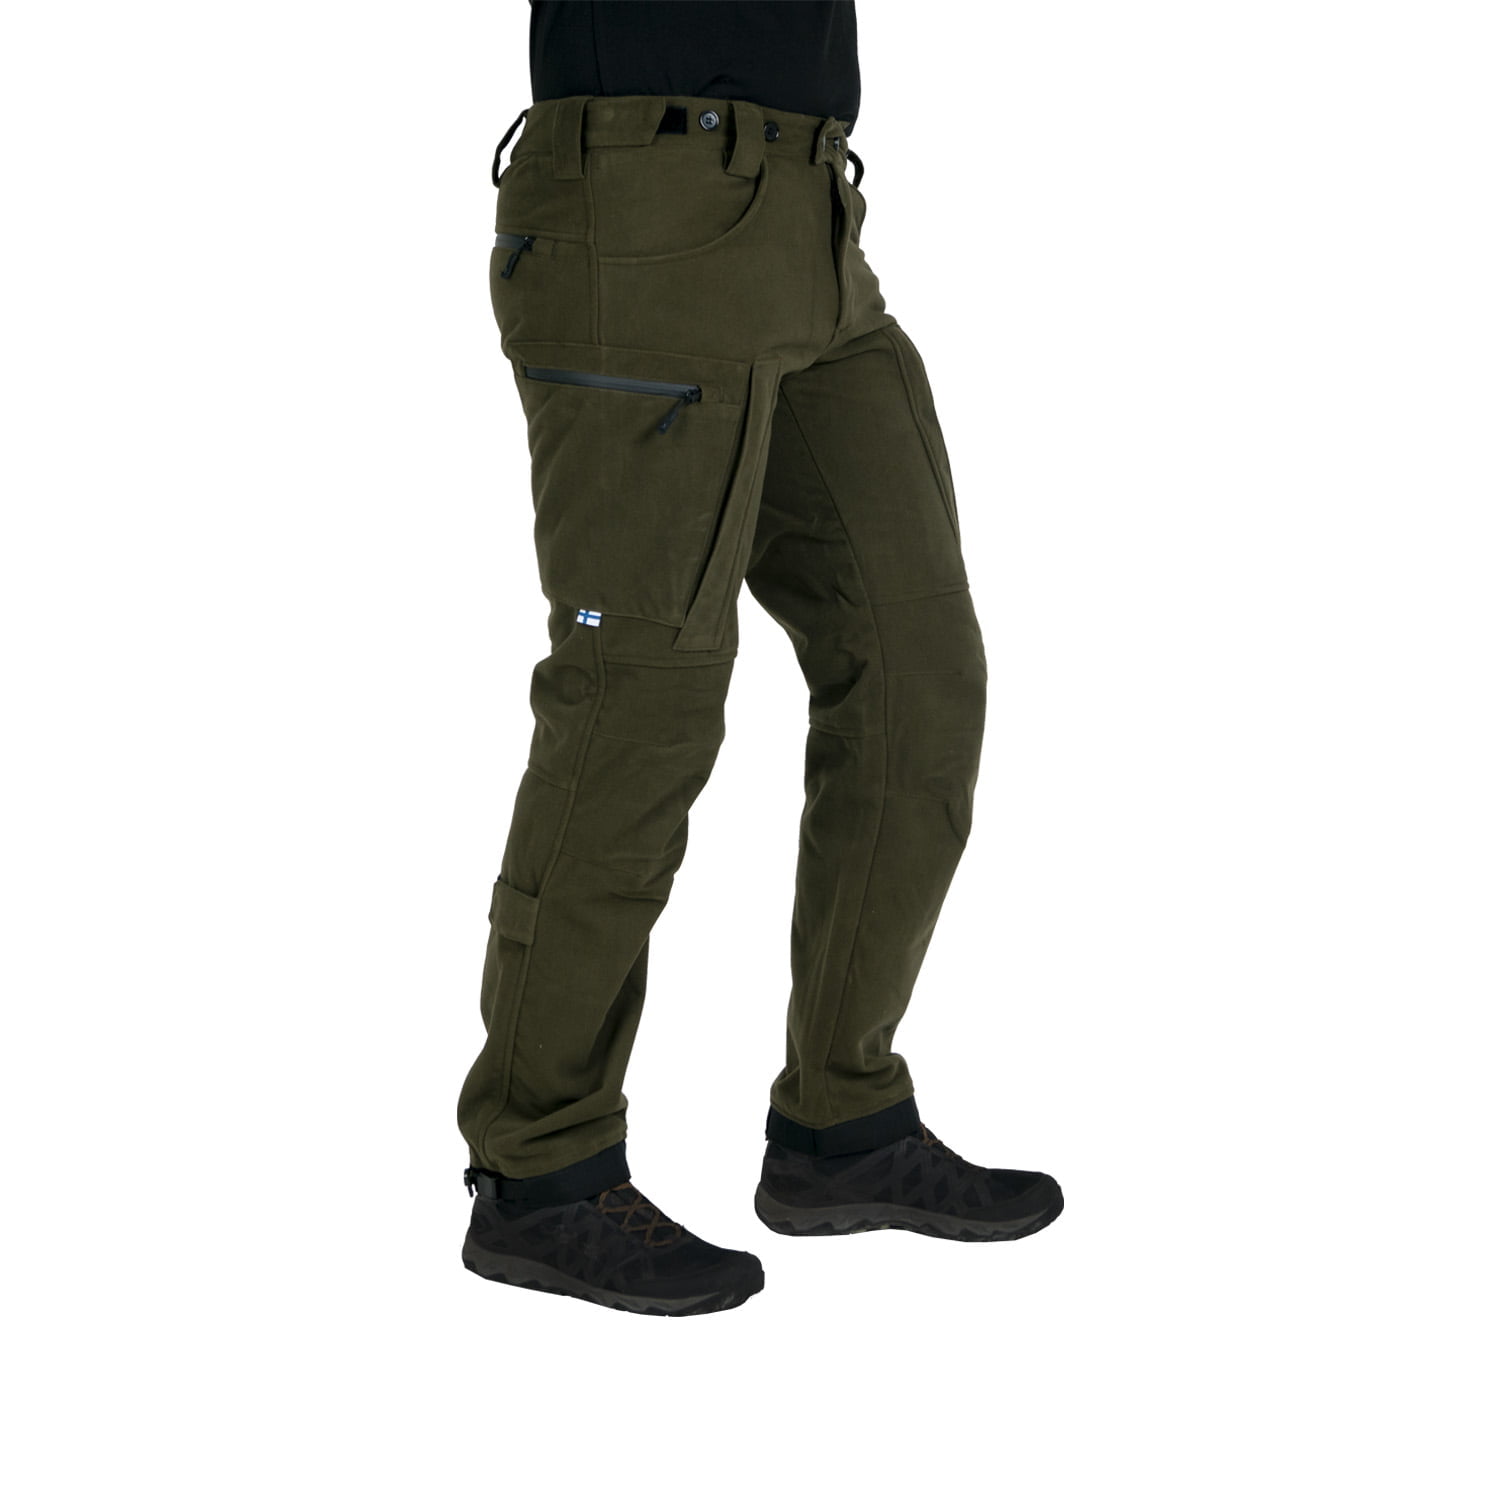 Repo Extreme Karelia Forest Green hunting pants shown from the side